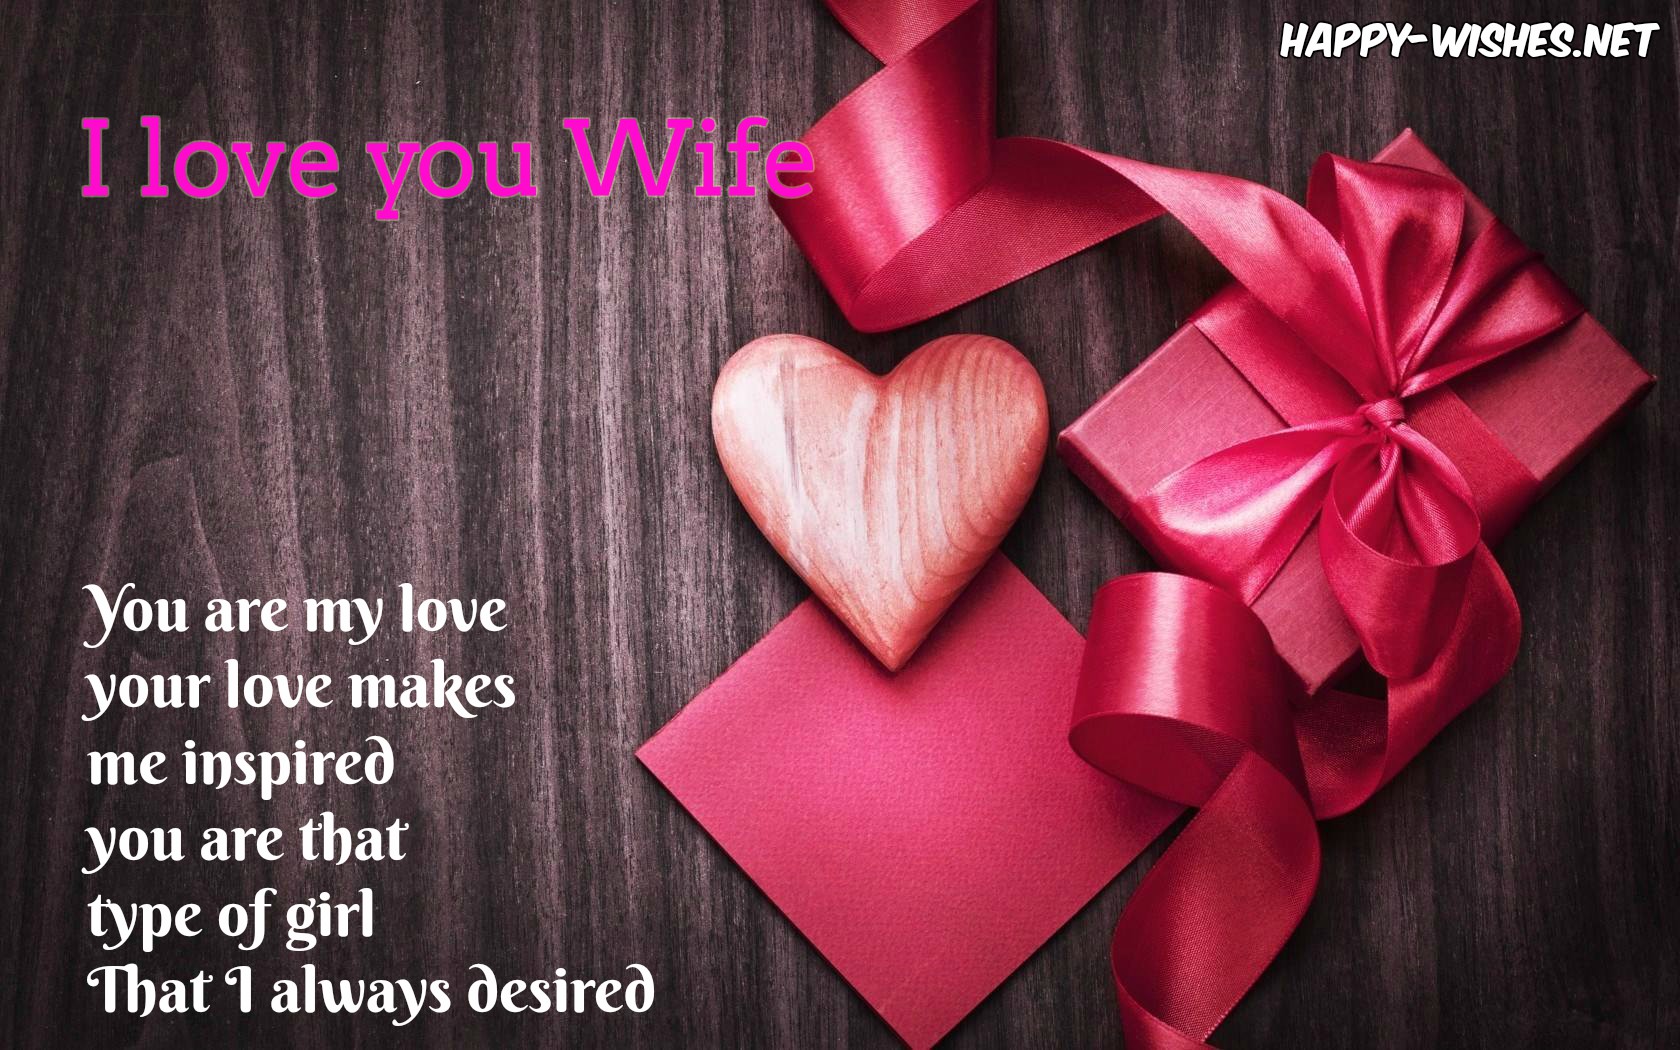 I love you wishes for wife